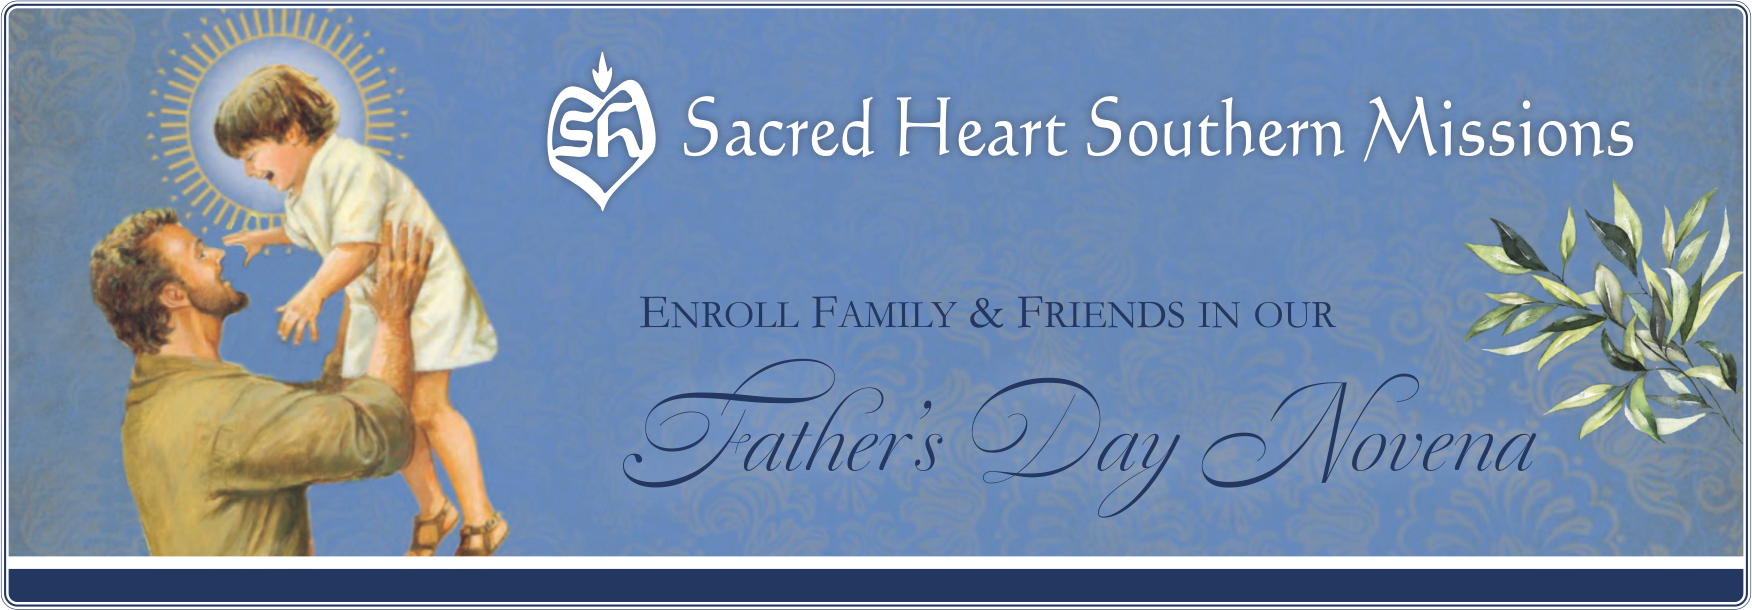 Father's Day Novena